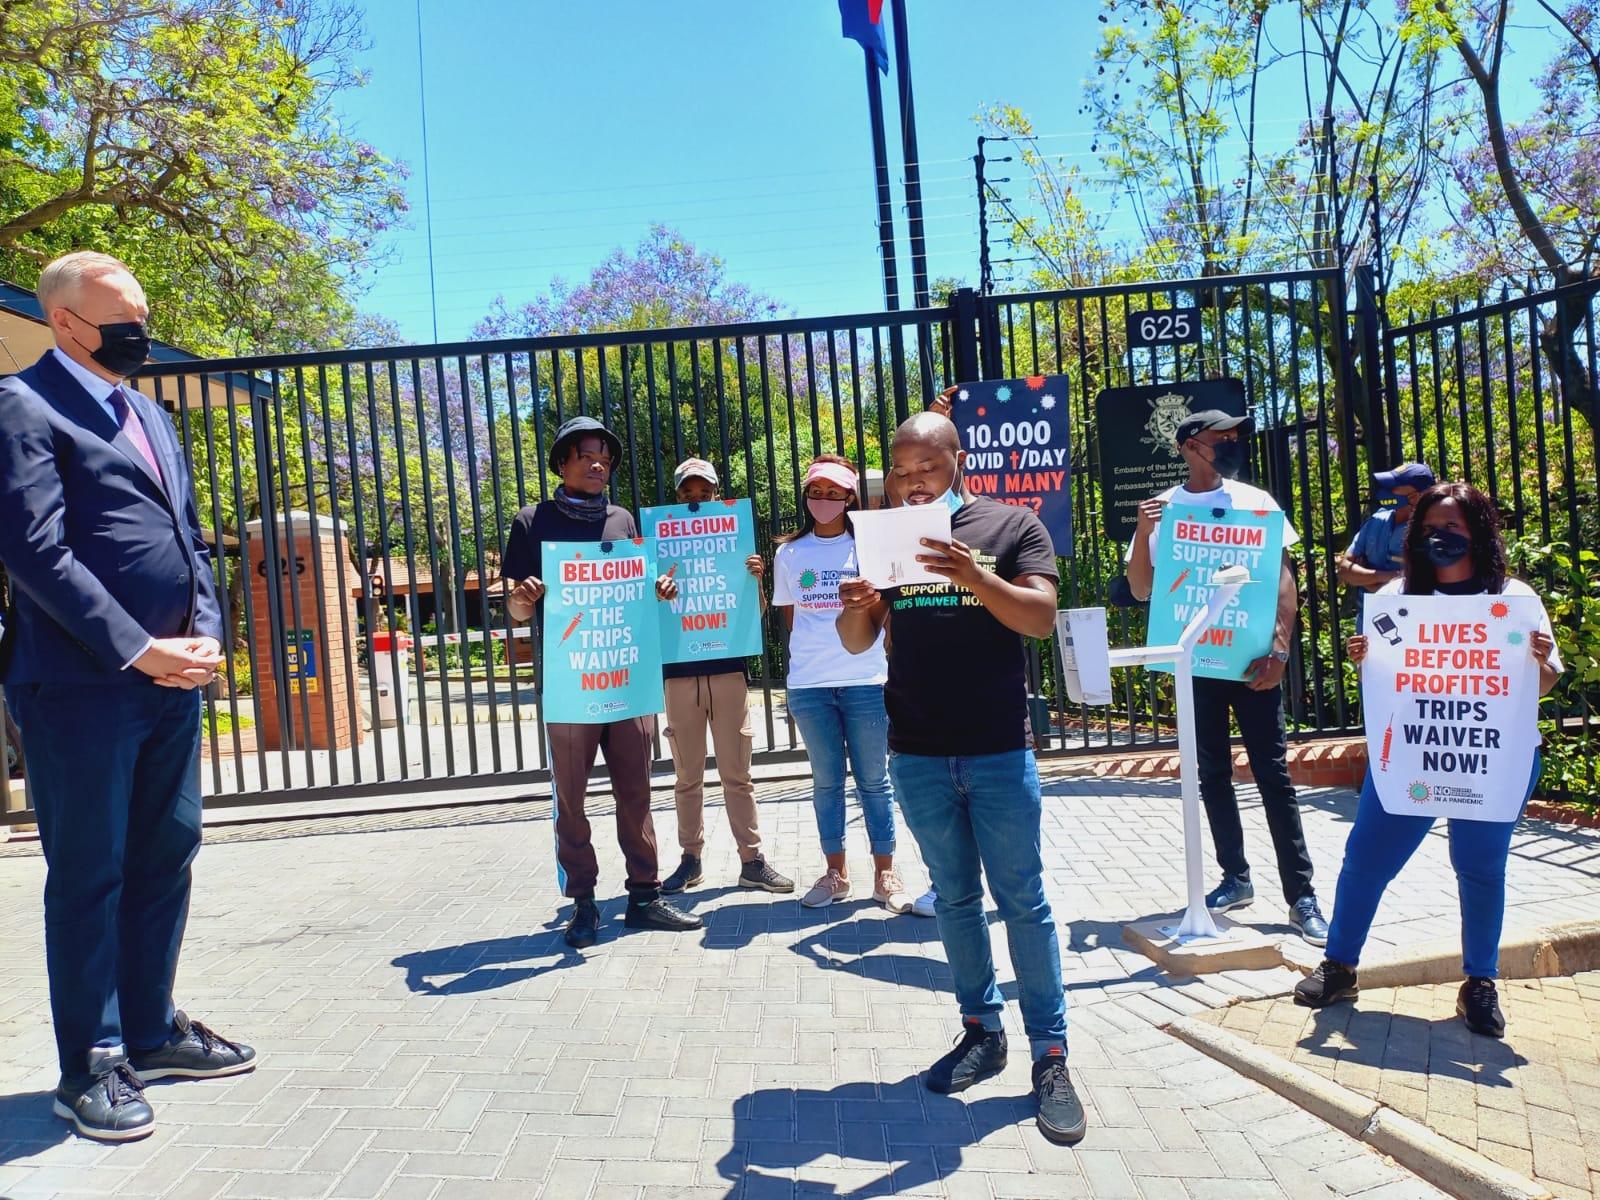 MSF Vusani Raduvha Philanthropy Research Intern in Fundraising reading out the letter to the Belgium Ambassador-Didier Vanderhasselt outside the Belgium Embassy in Pretoria.